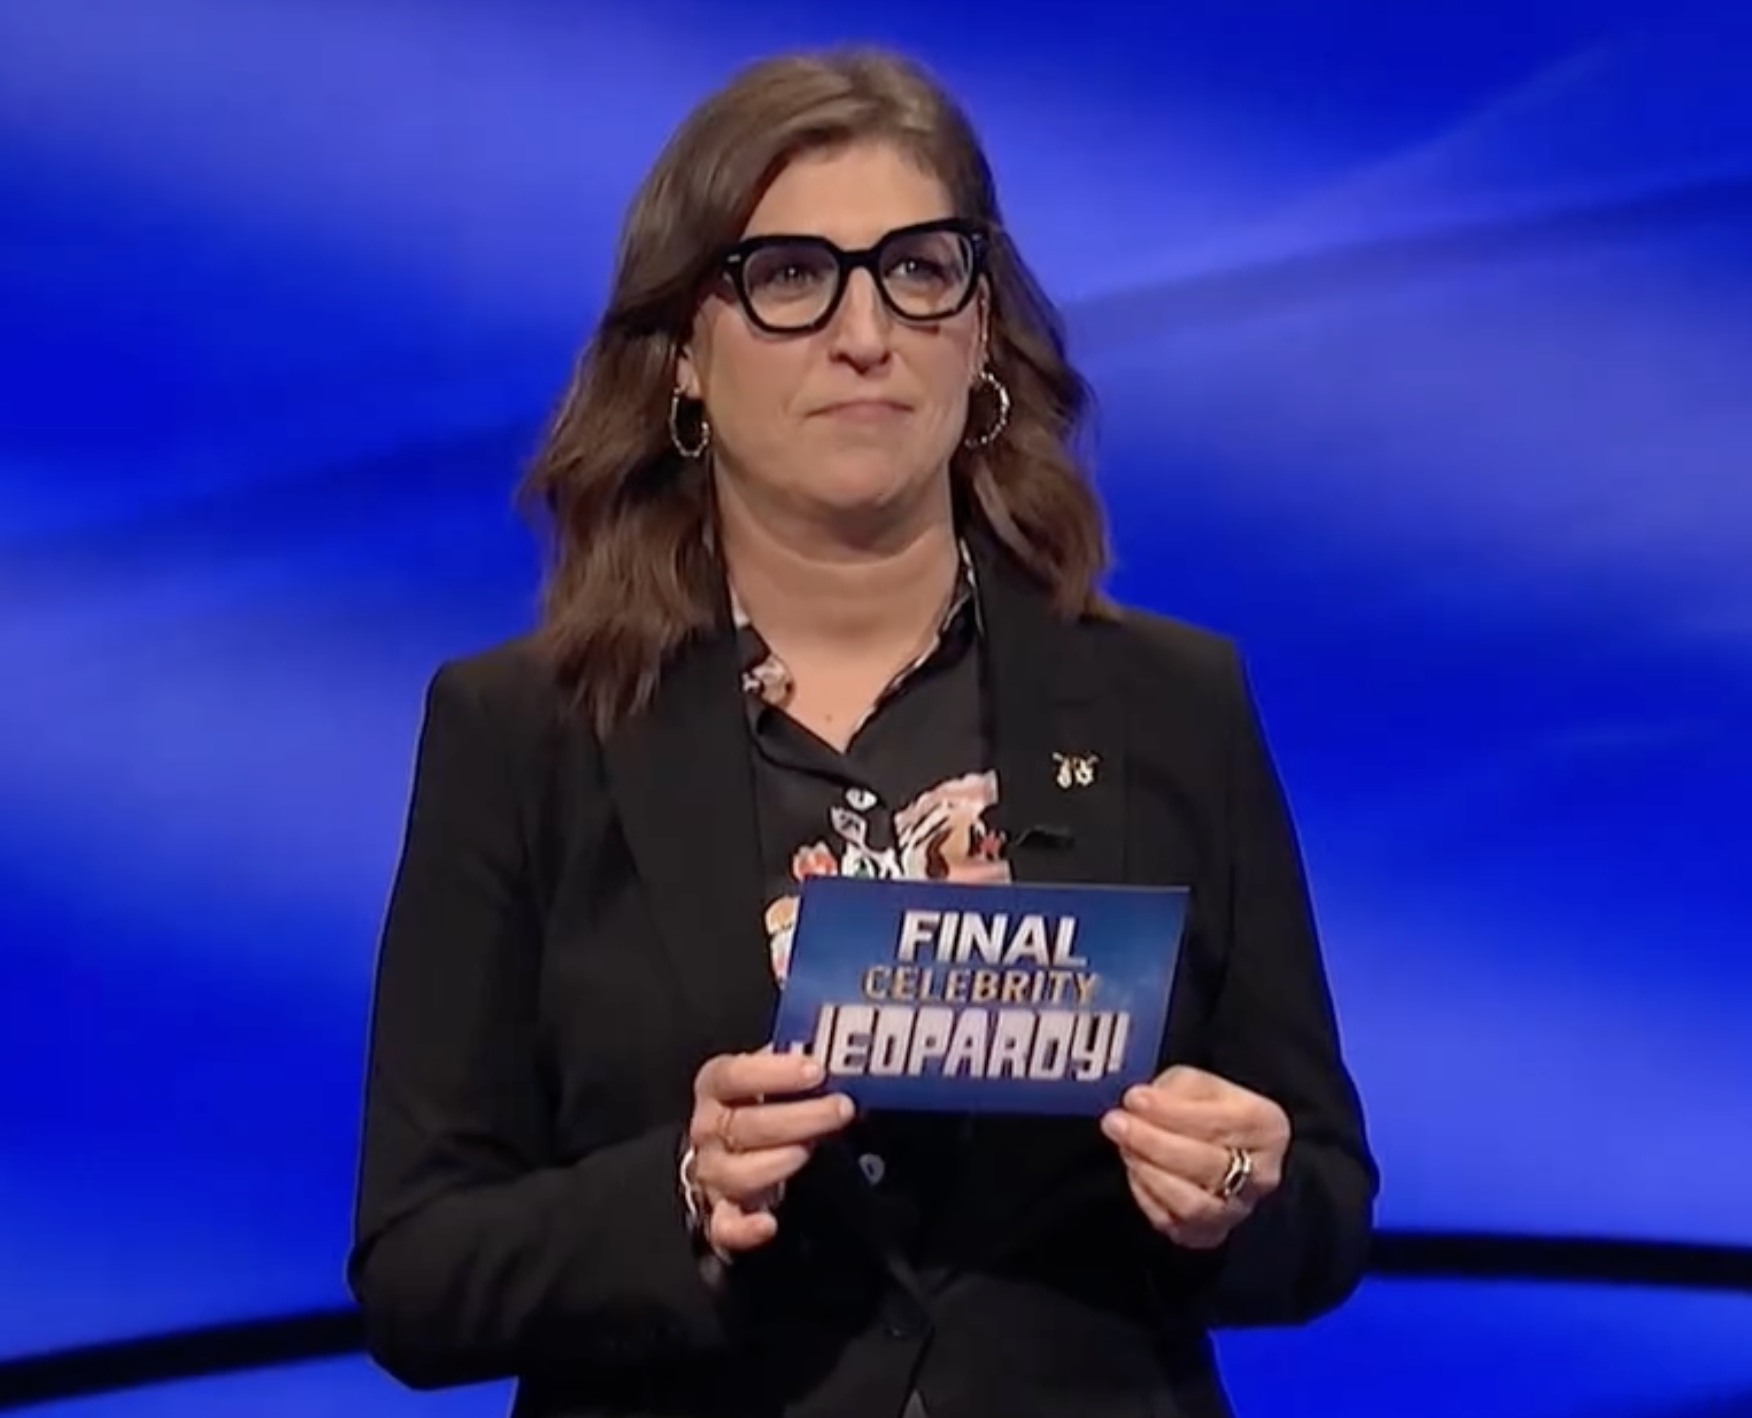 The episode comes after Mayim revealed she'd been fired as a host of Jeopardy!, removing 'co-host' from her Instagram bio